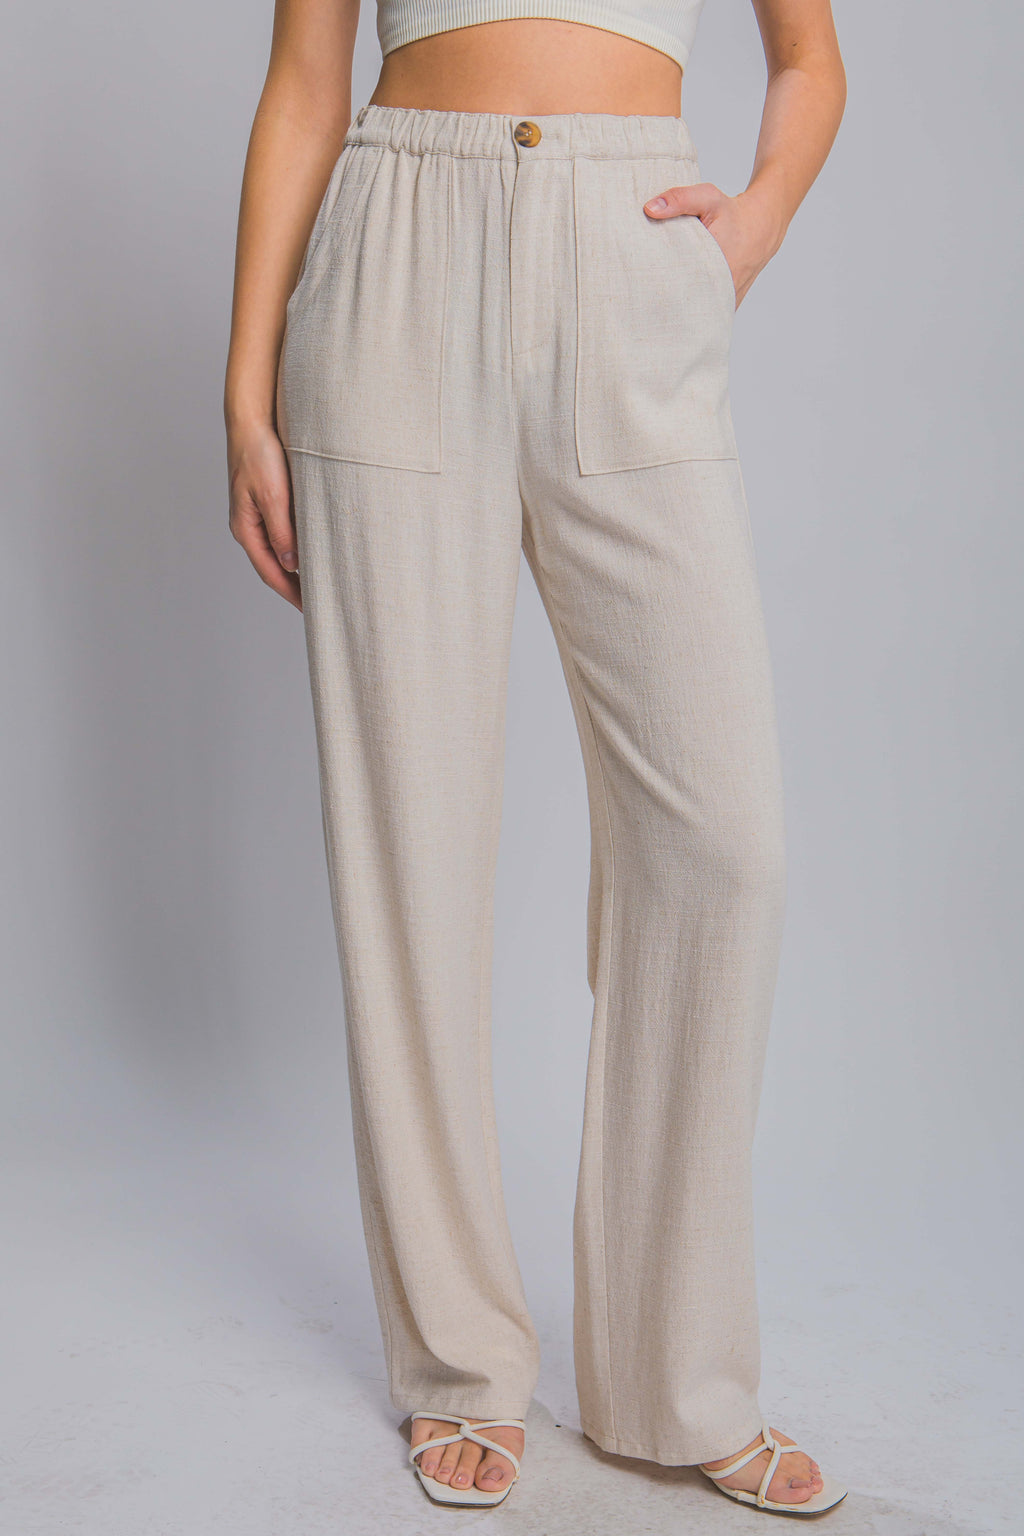 Long Ivory linen pants with dual side pockets and button front closure